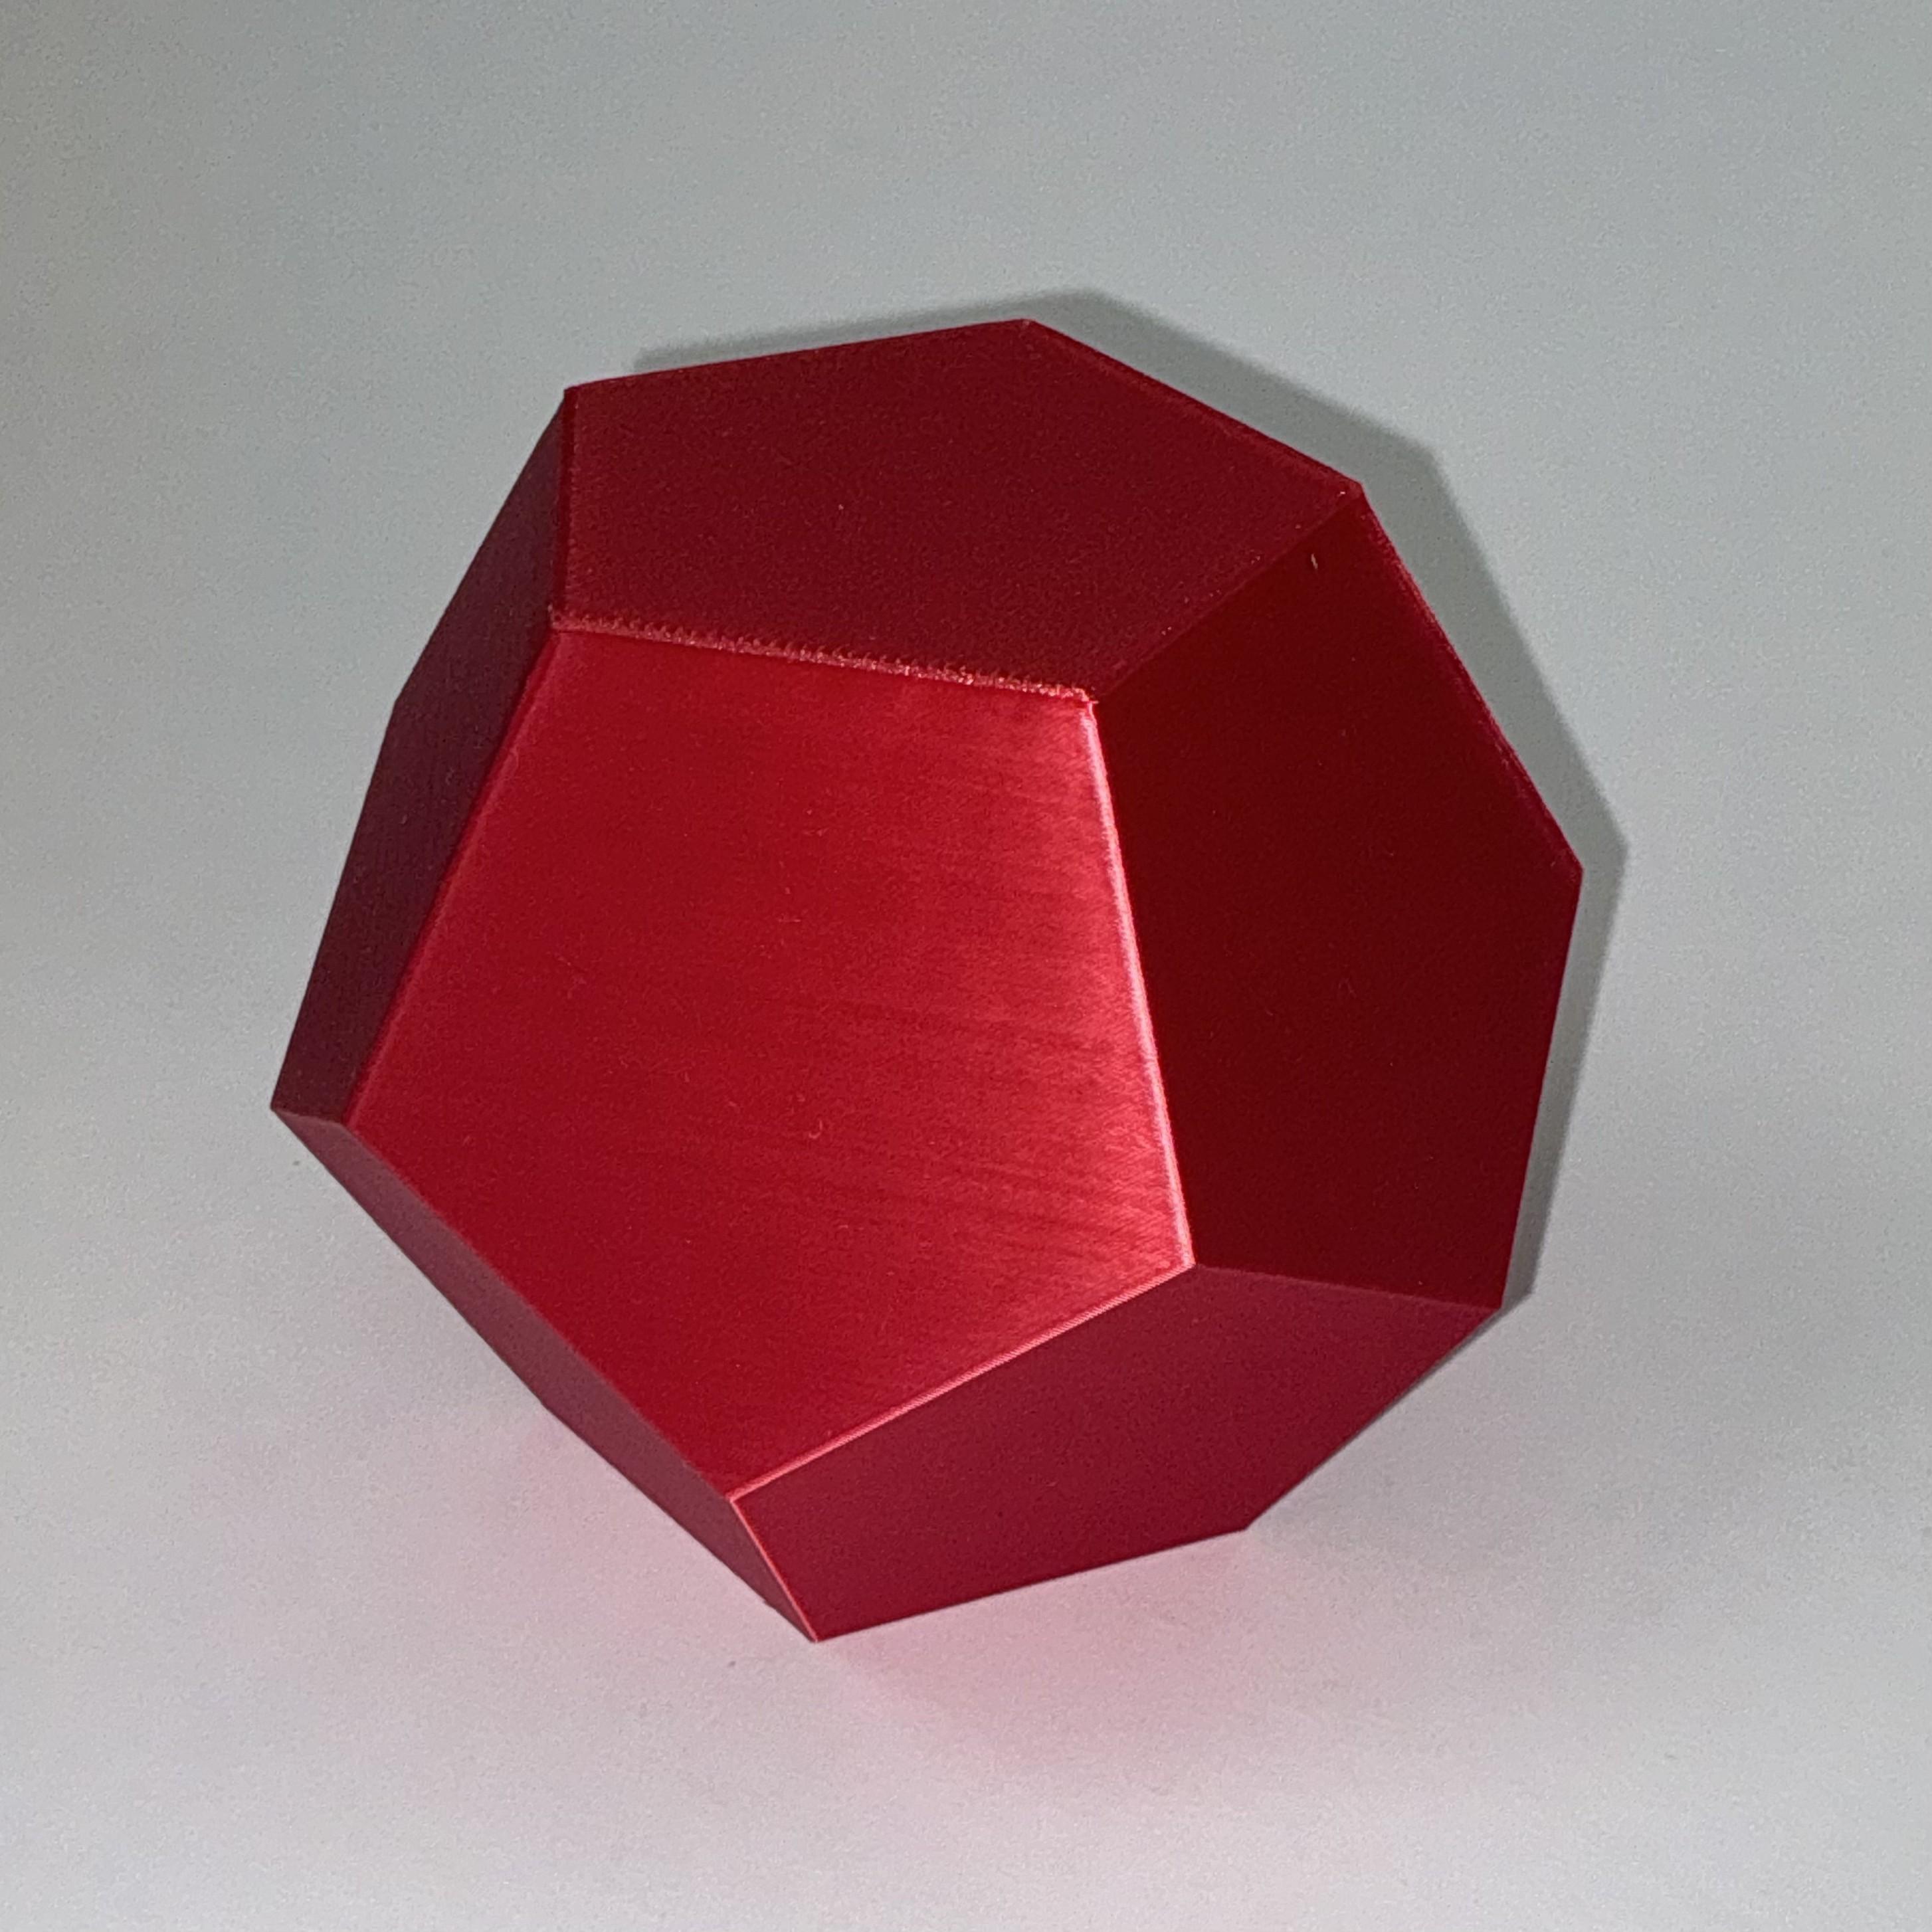 Dodecahedron.step 3d model